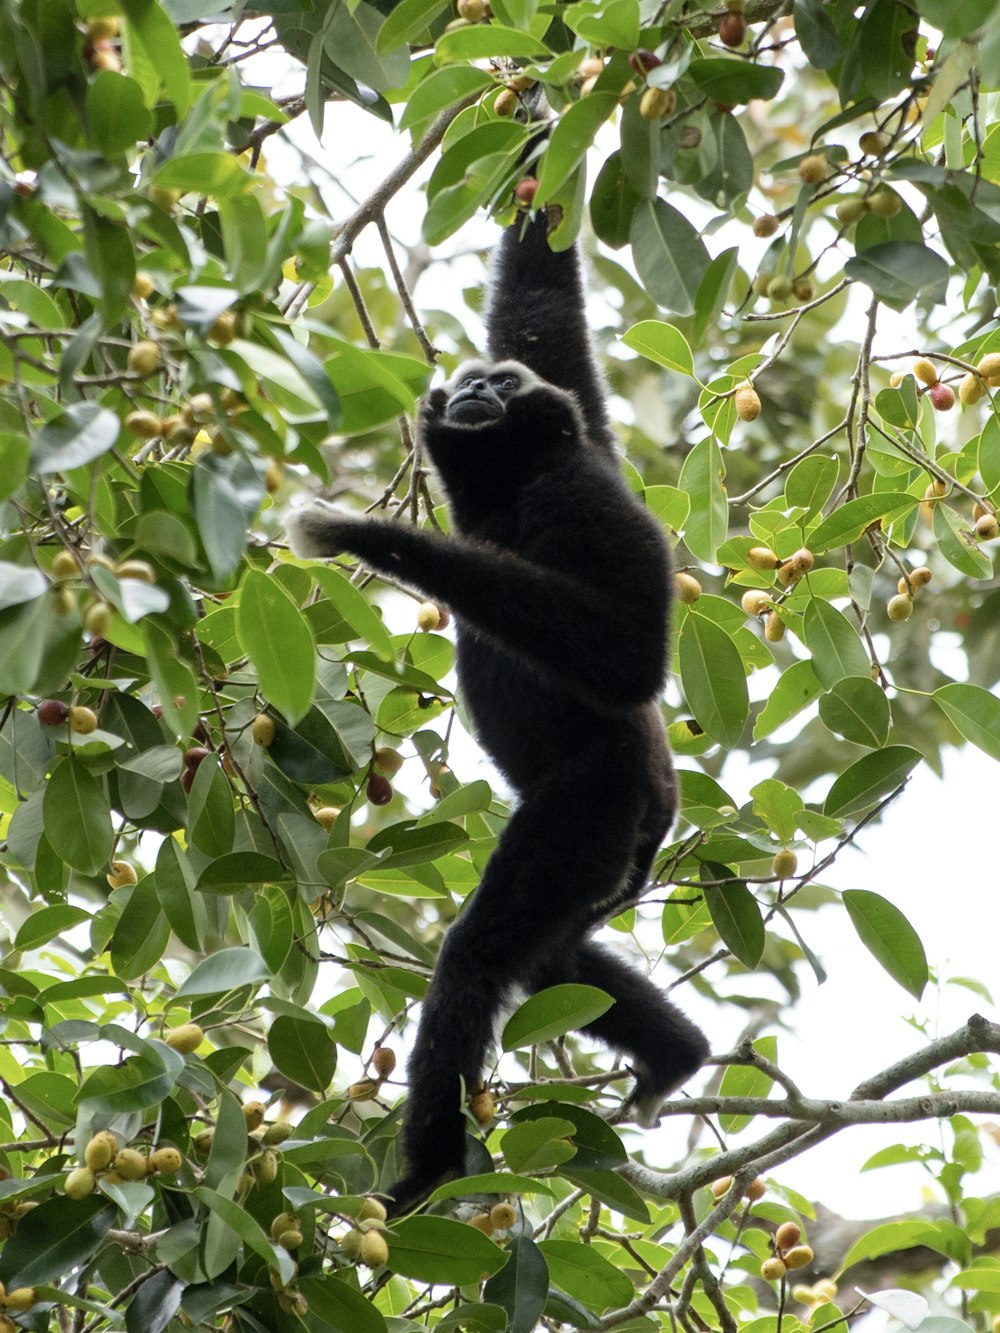 a black monkey hanging from a tree branch